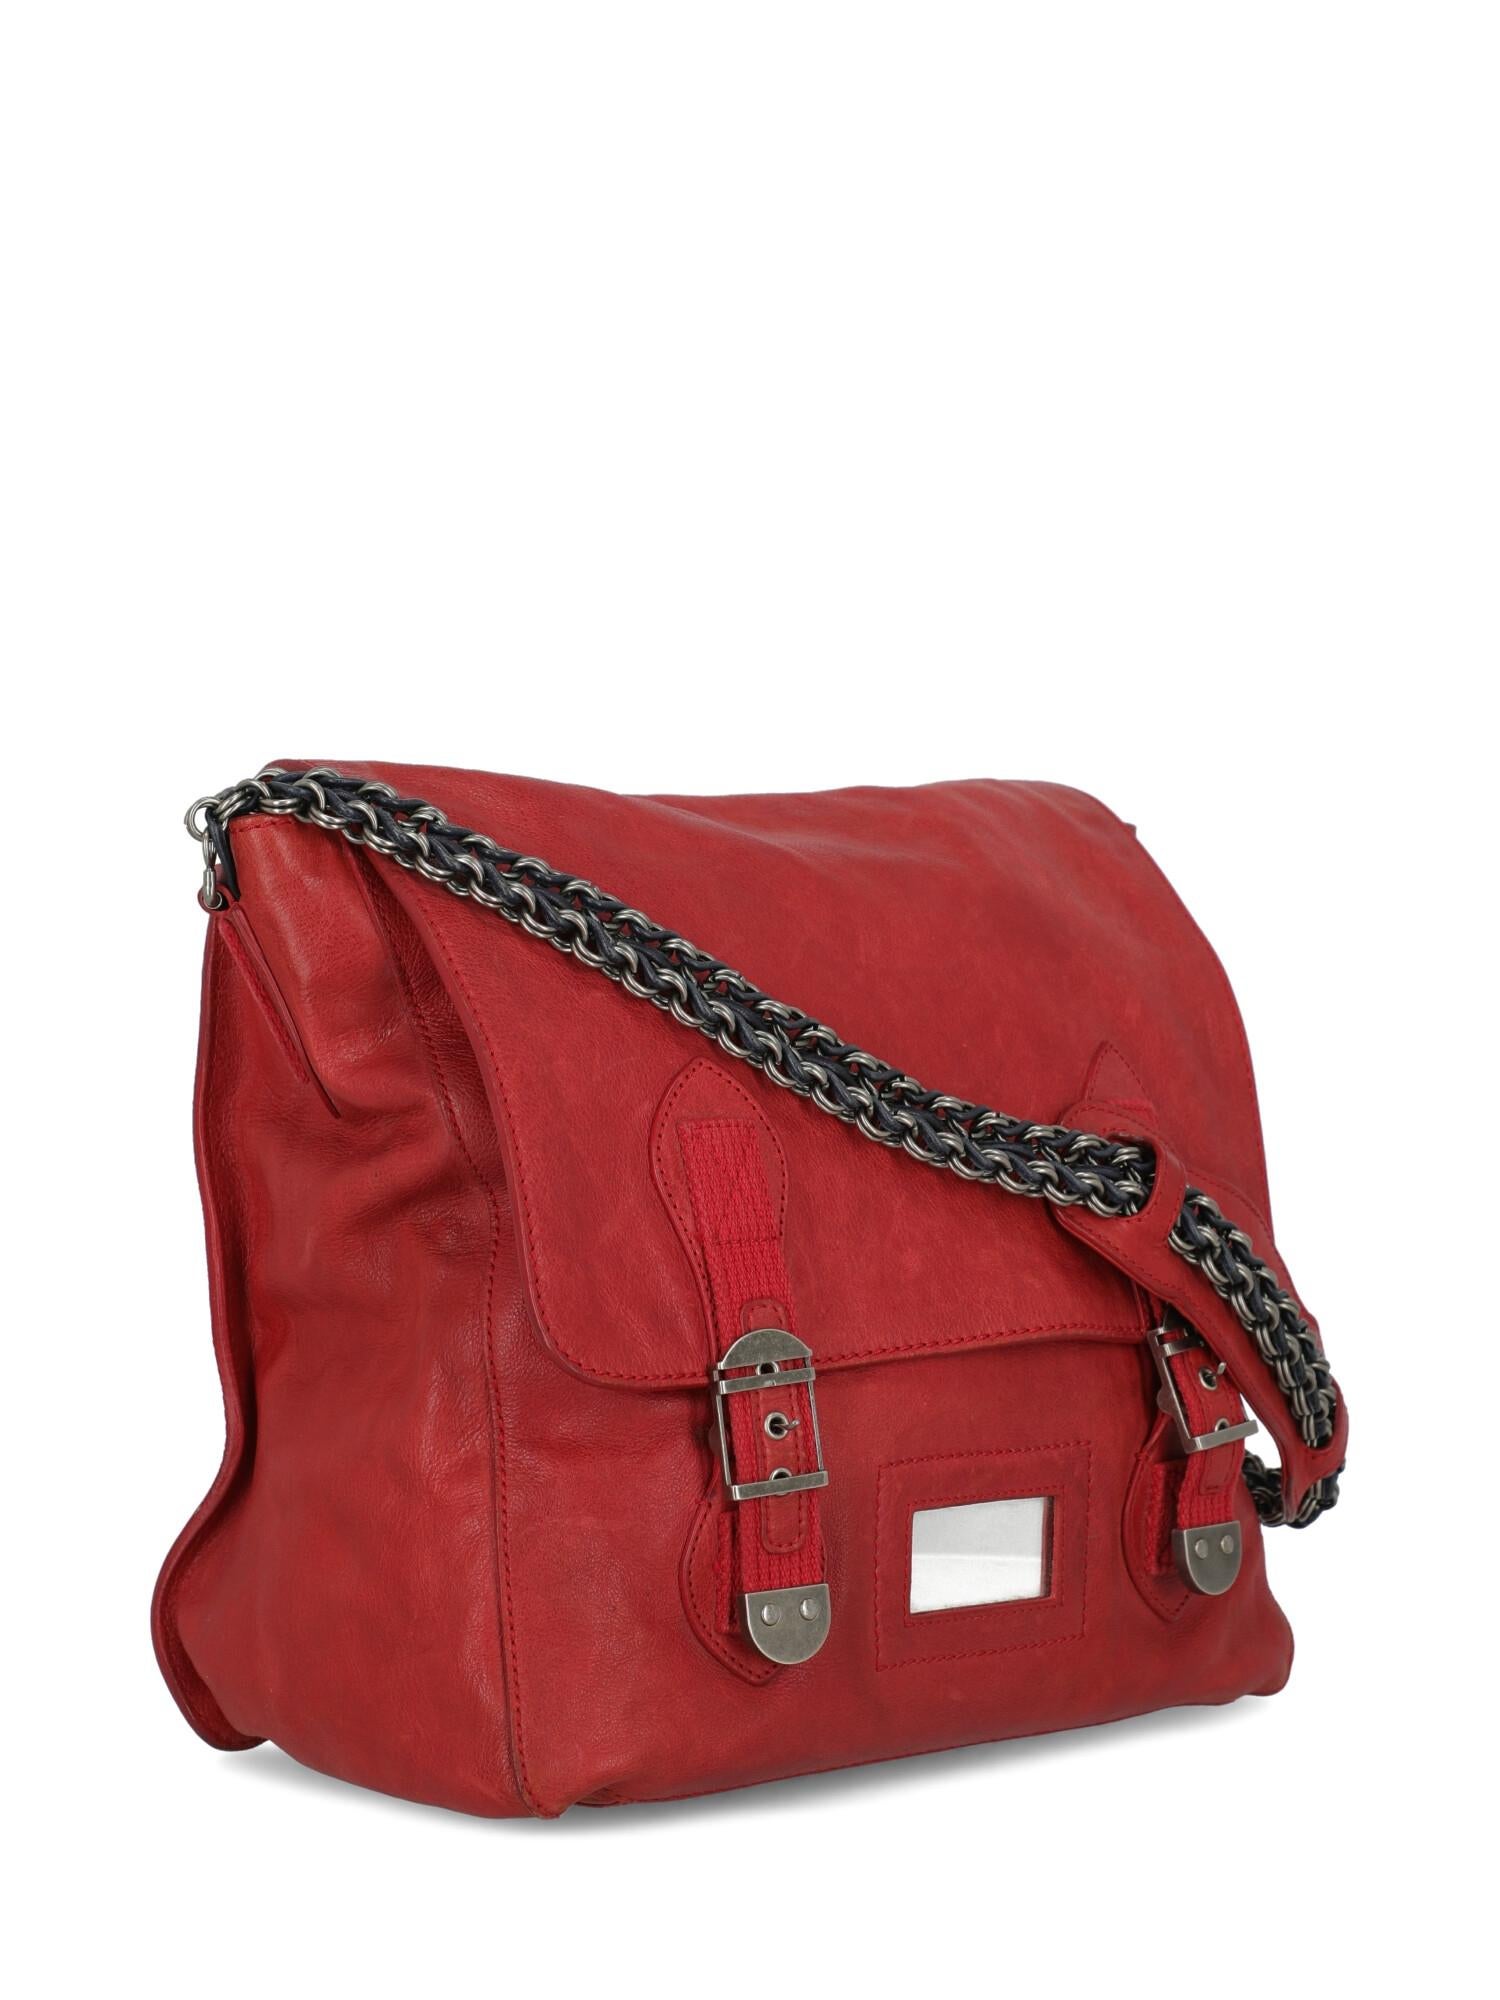 Balenciaga Woman Shoulder bag Red Leather In Good Condition For Sale In Milan, IT